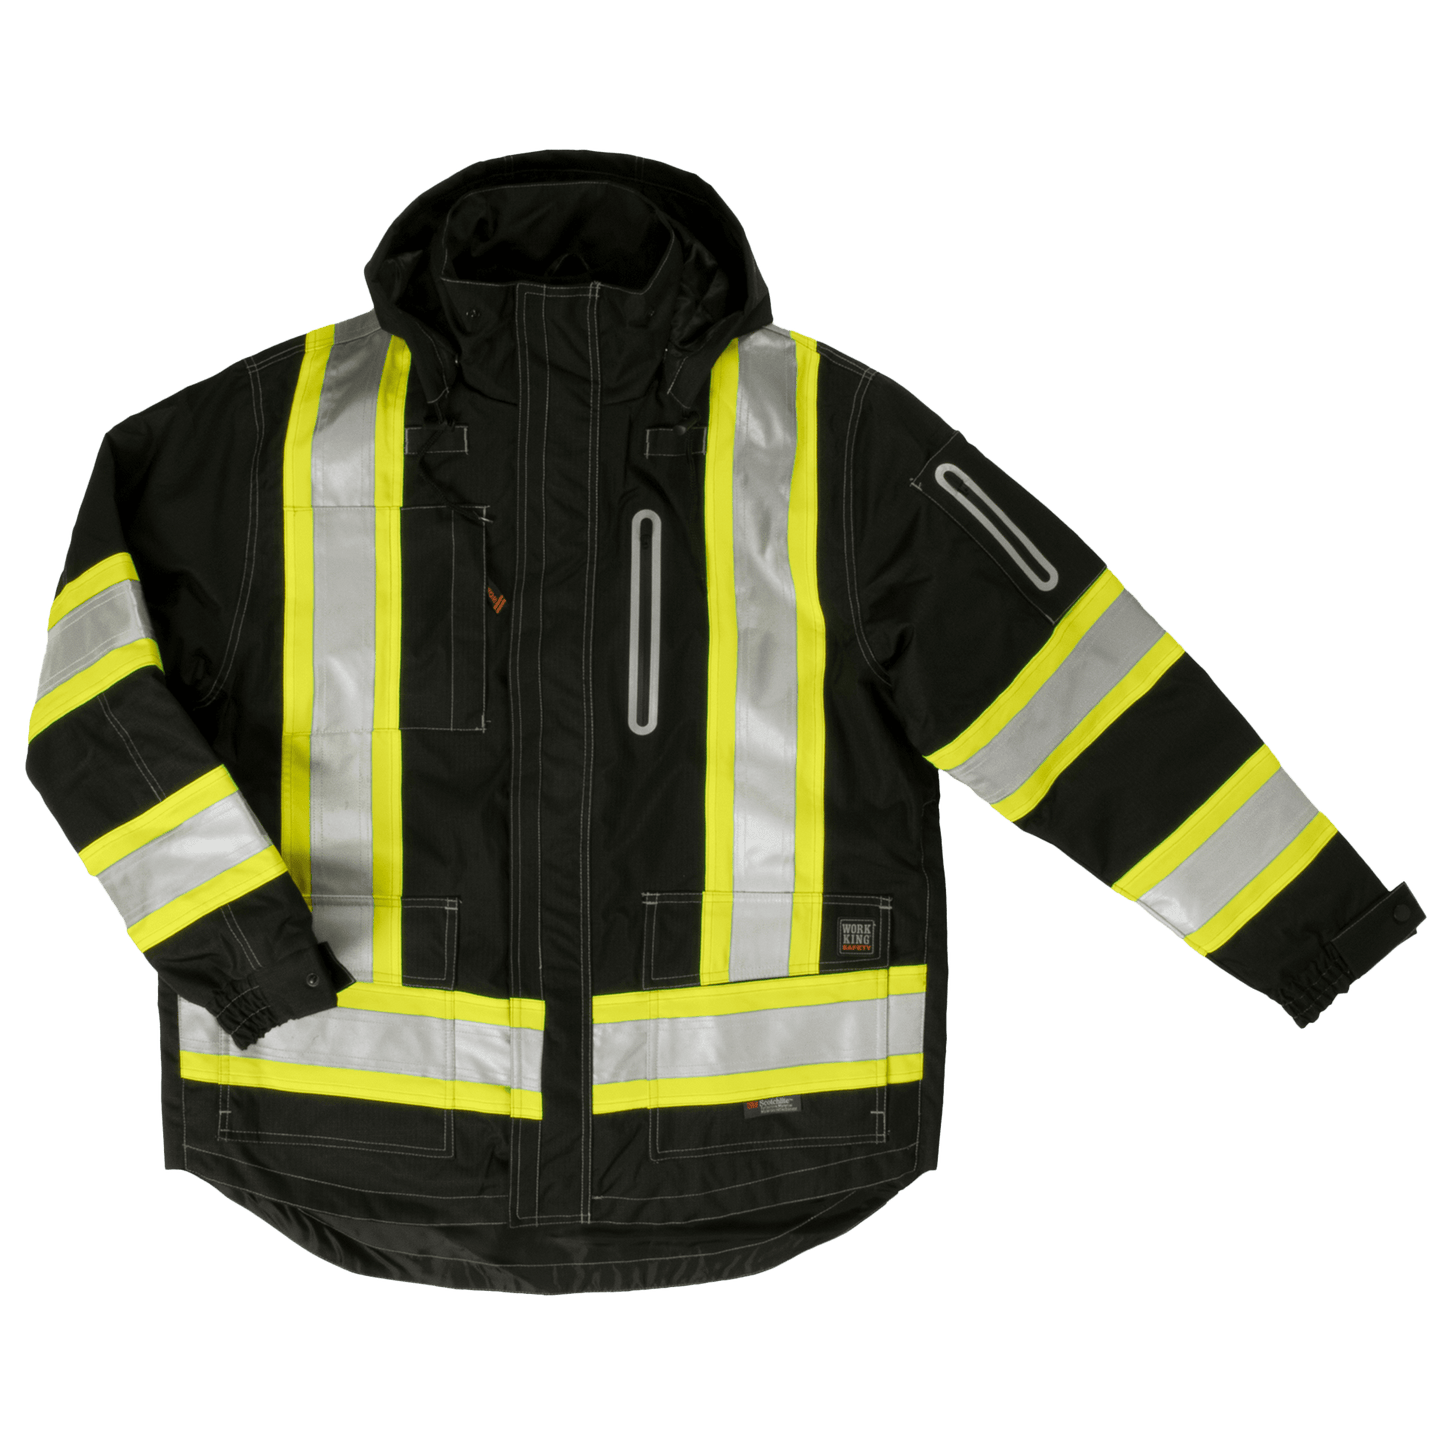 Tough Duck 4-in-1 Safety Jacket - S187 - Black